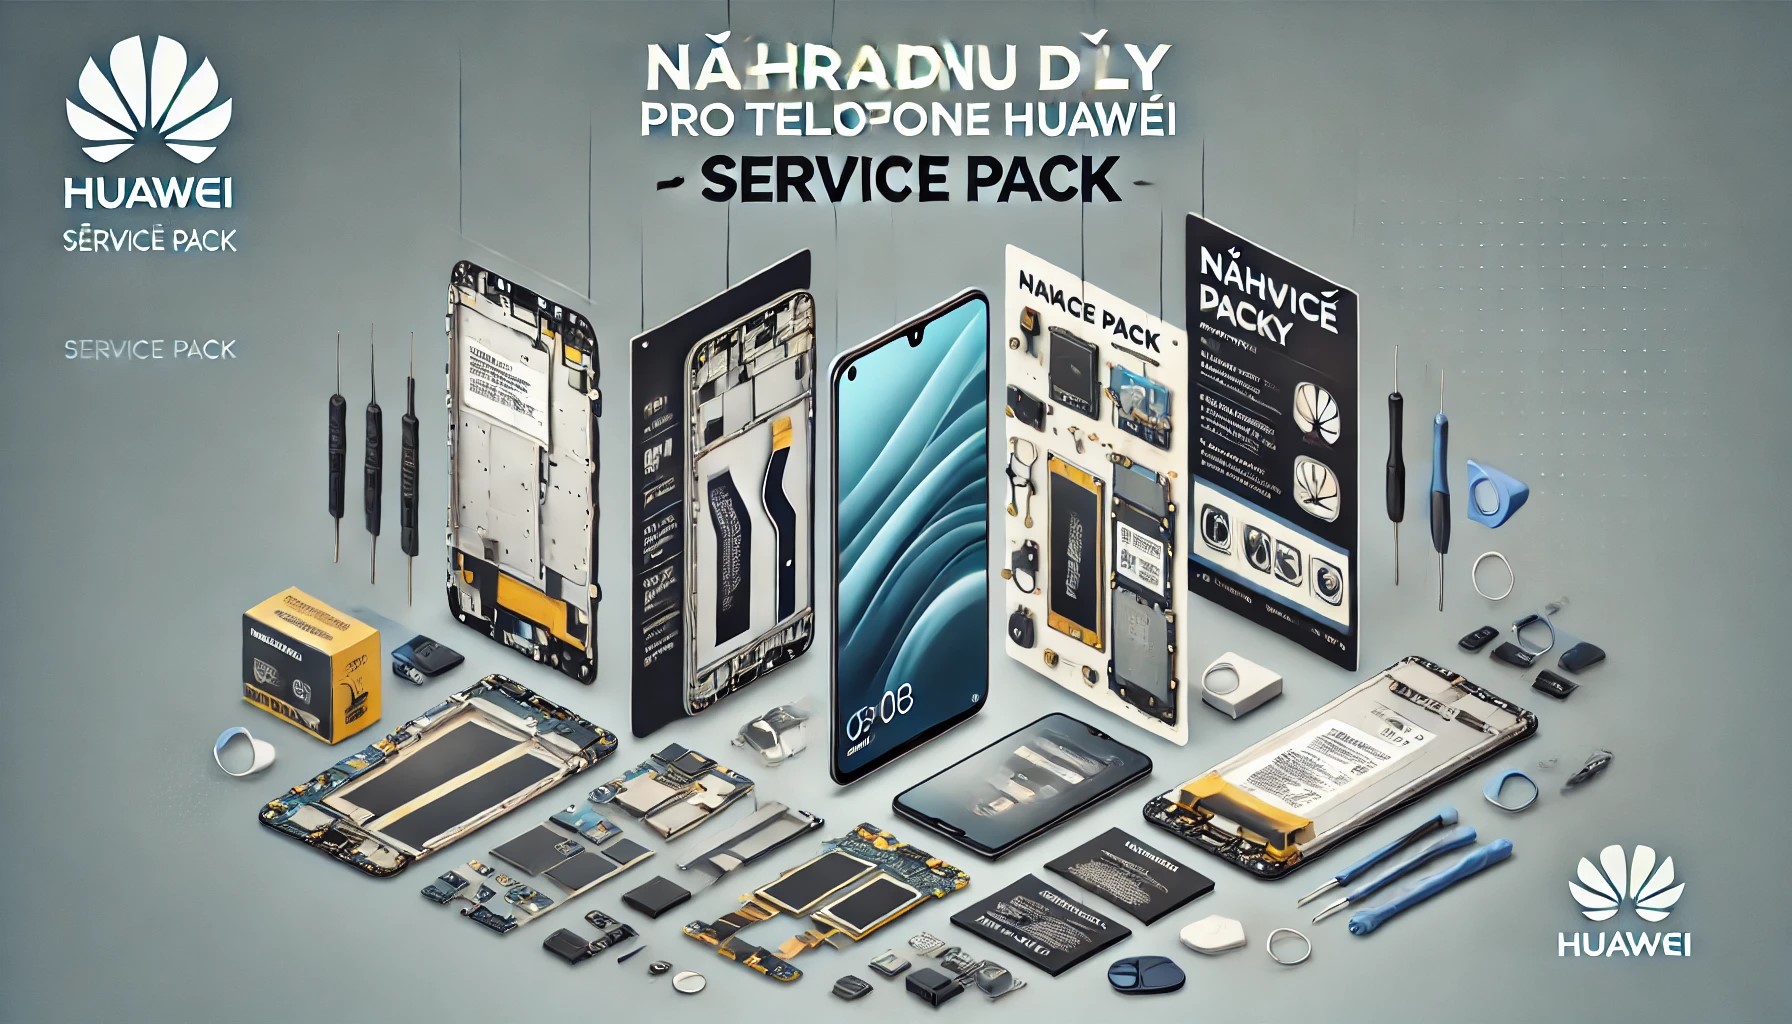 Huawei (Service pack)